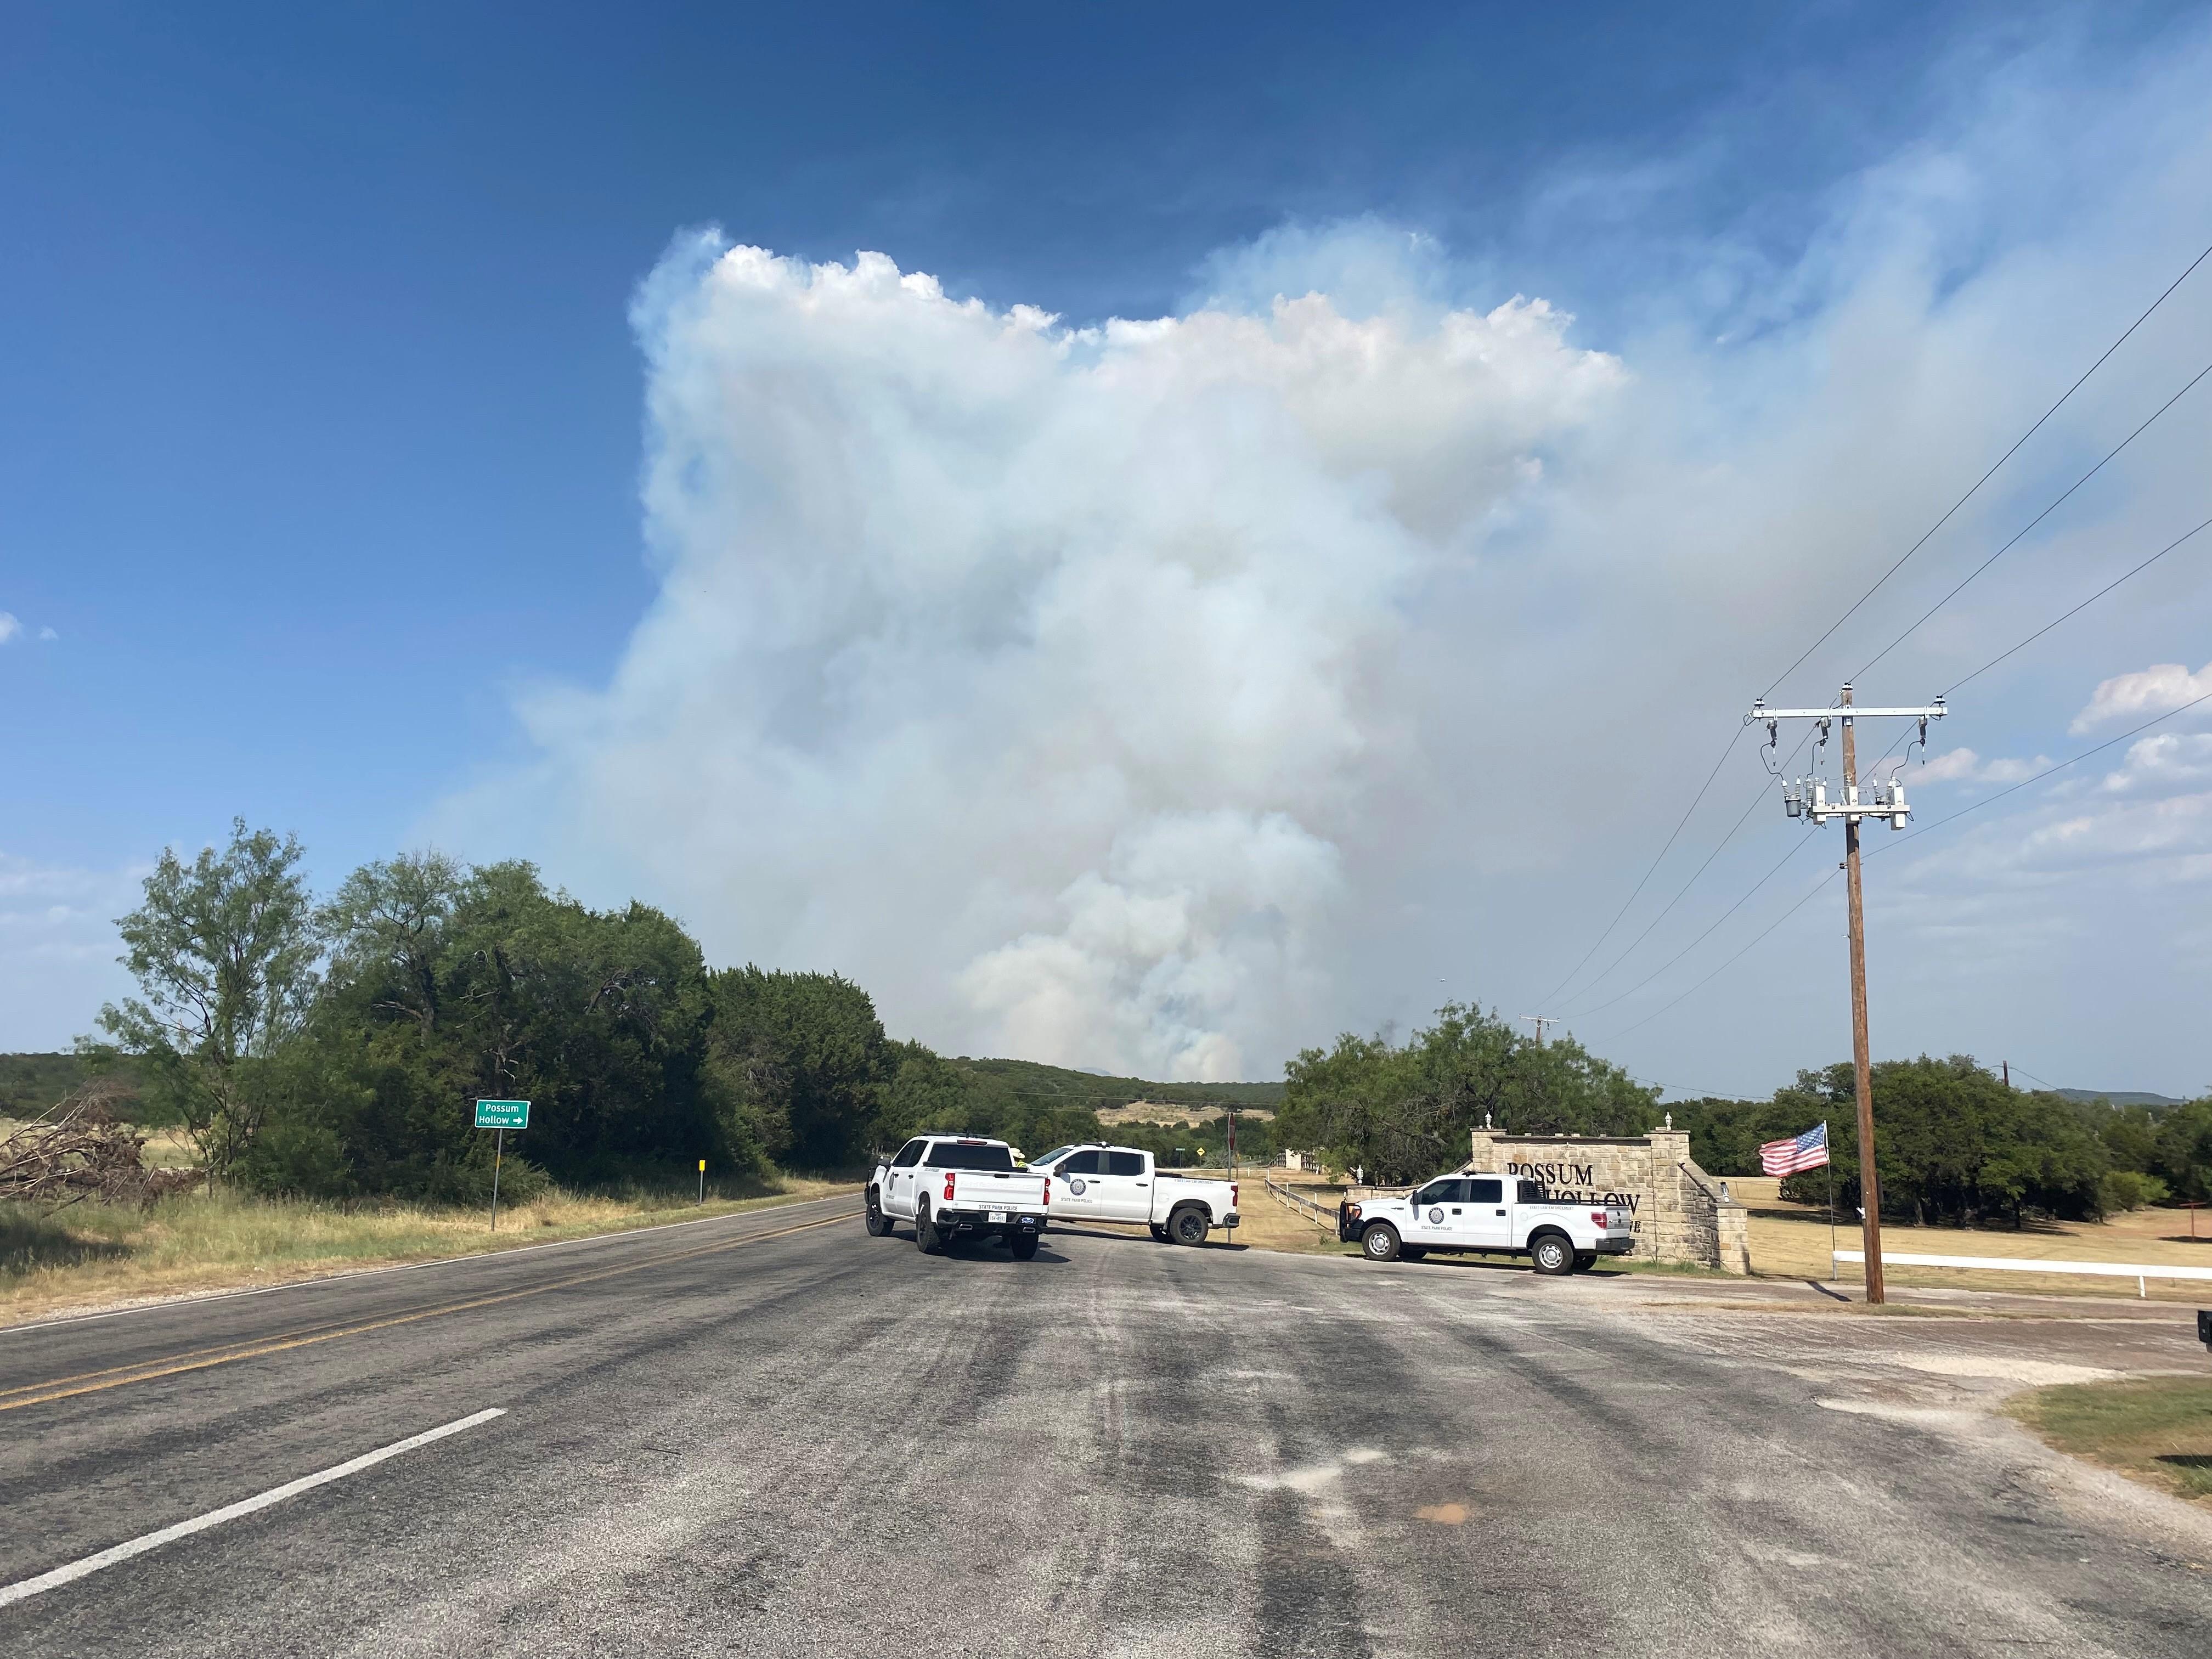 3 white trucks block the roadway leading to the 1148 Fire in Palo Pinto County. A smoke plume shows in the background with clear blue skies.